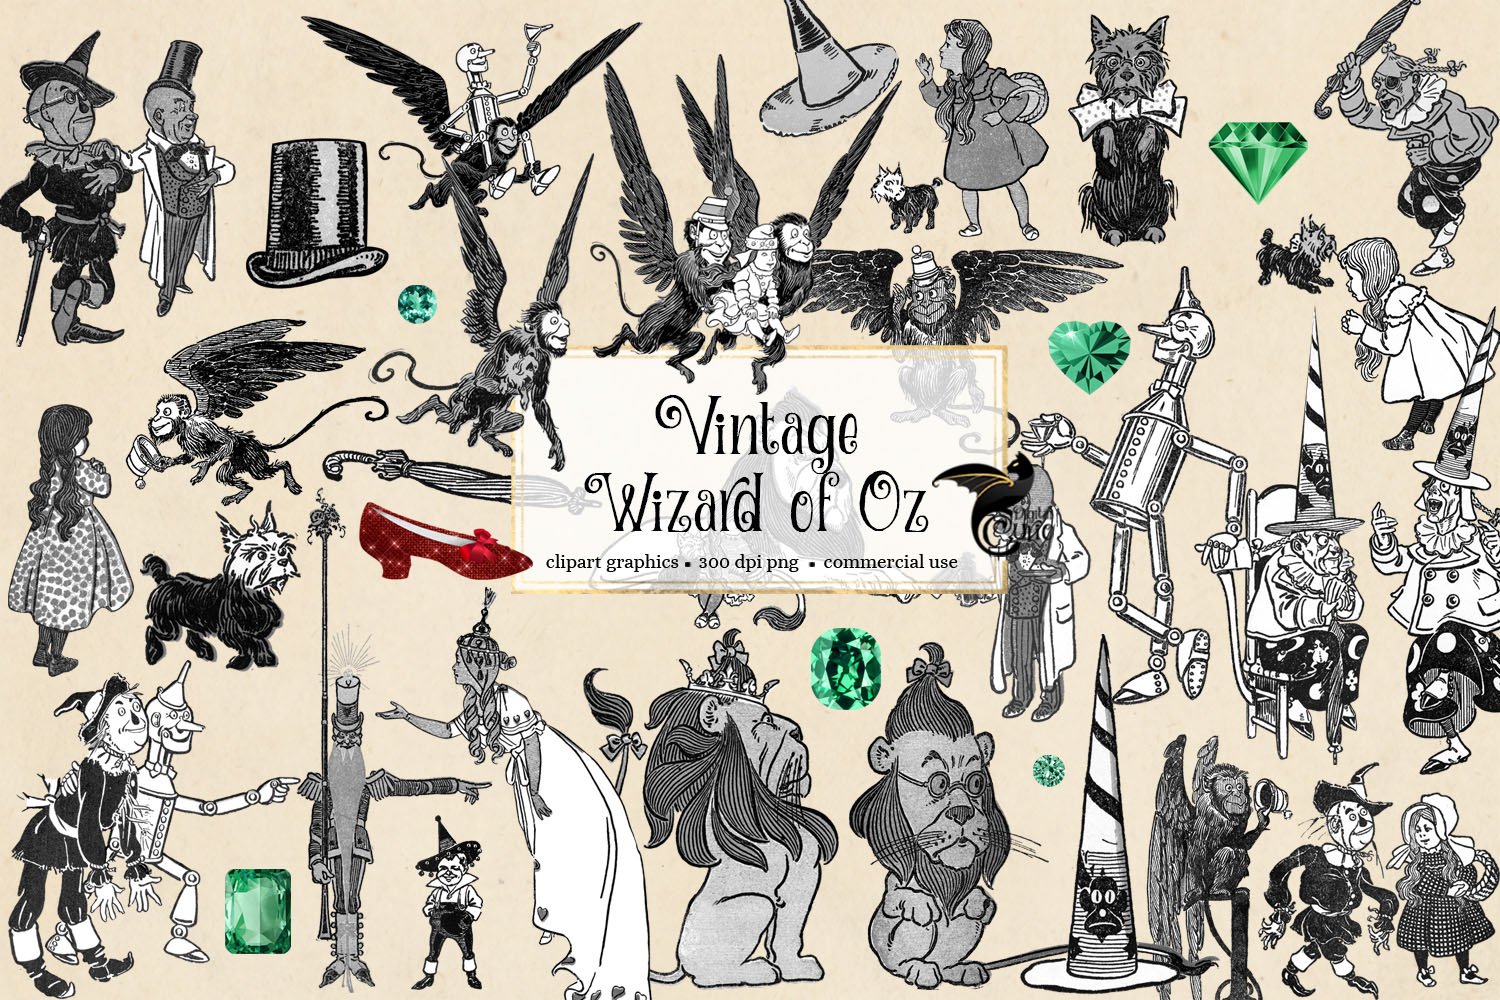 Vintage Wizard of Oz Clipart cover image.